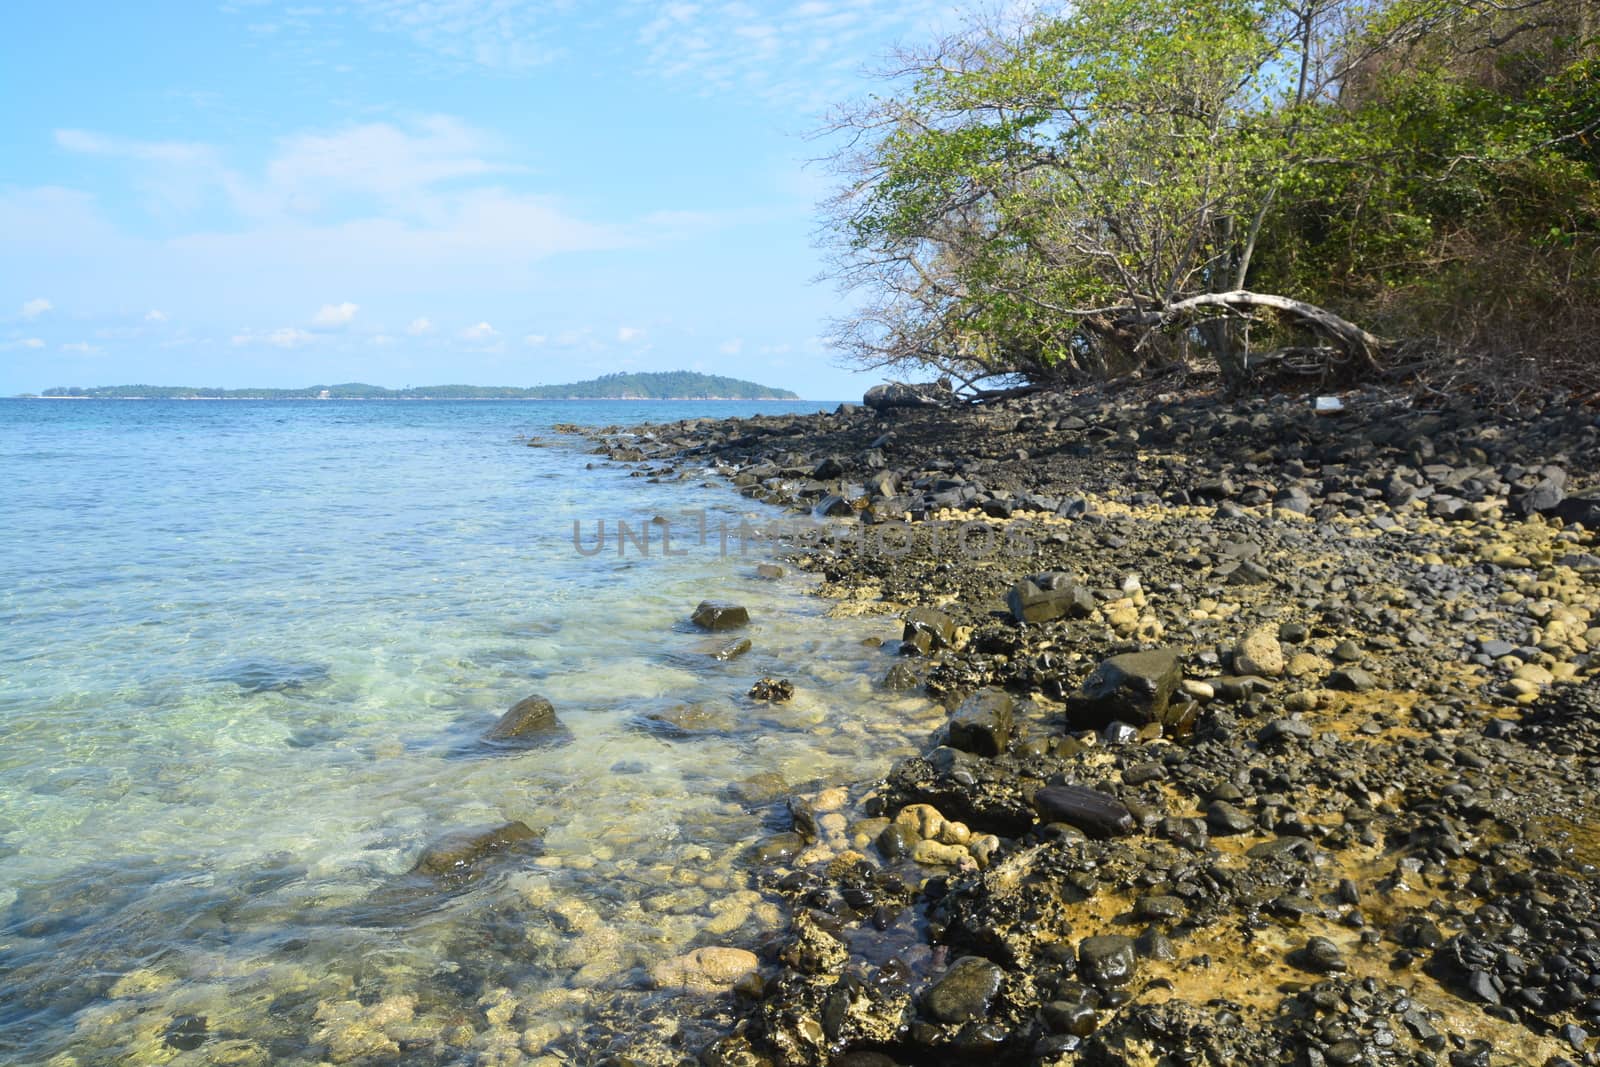 Koh Hin Ngam  is a unique small island unlike other island. It's covered with small black rocks  by ideation90